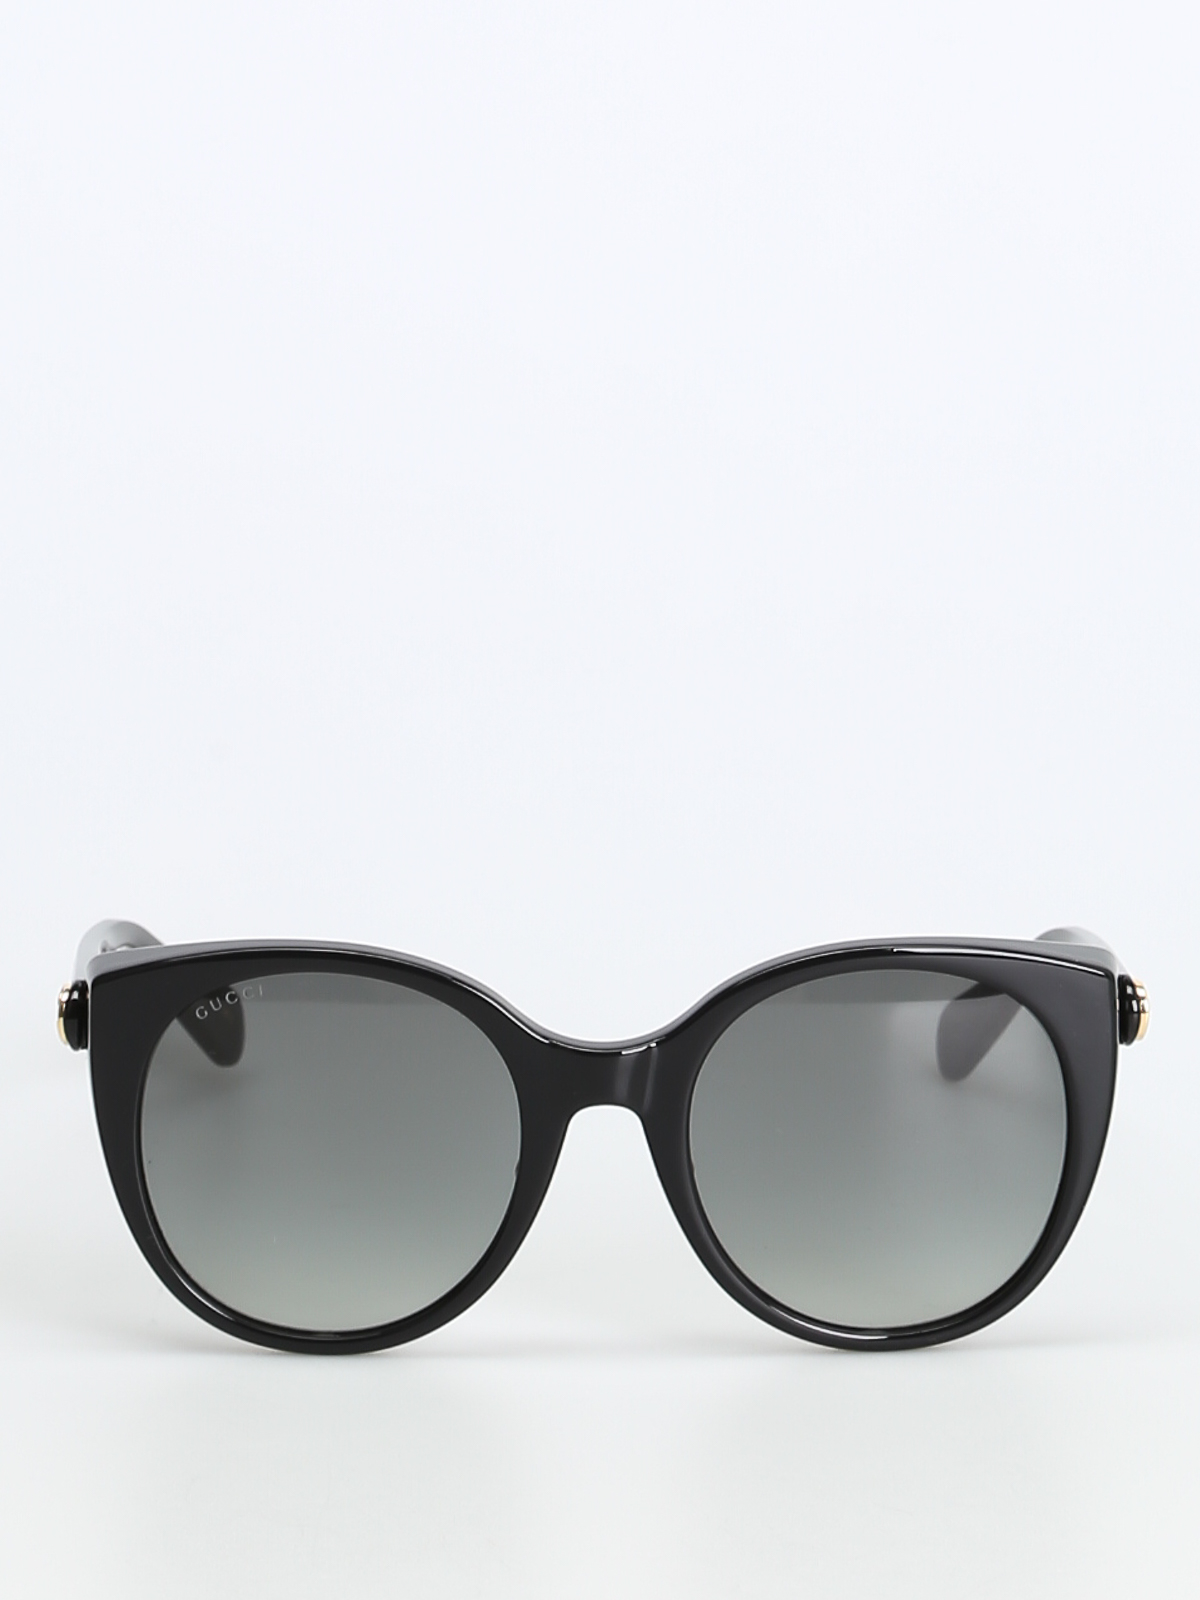 Gucci - Black cat eye sunglasses with 